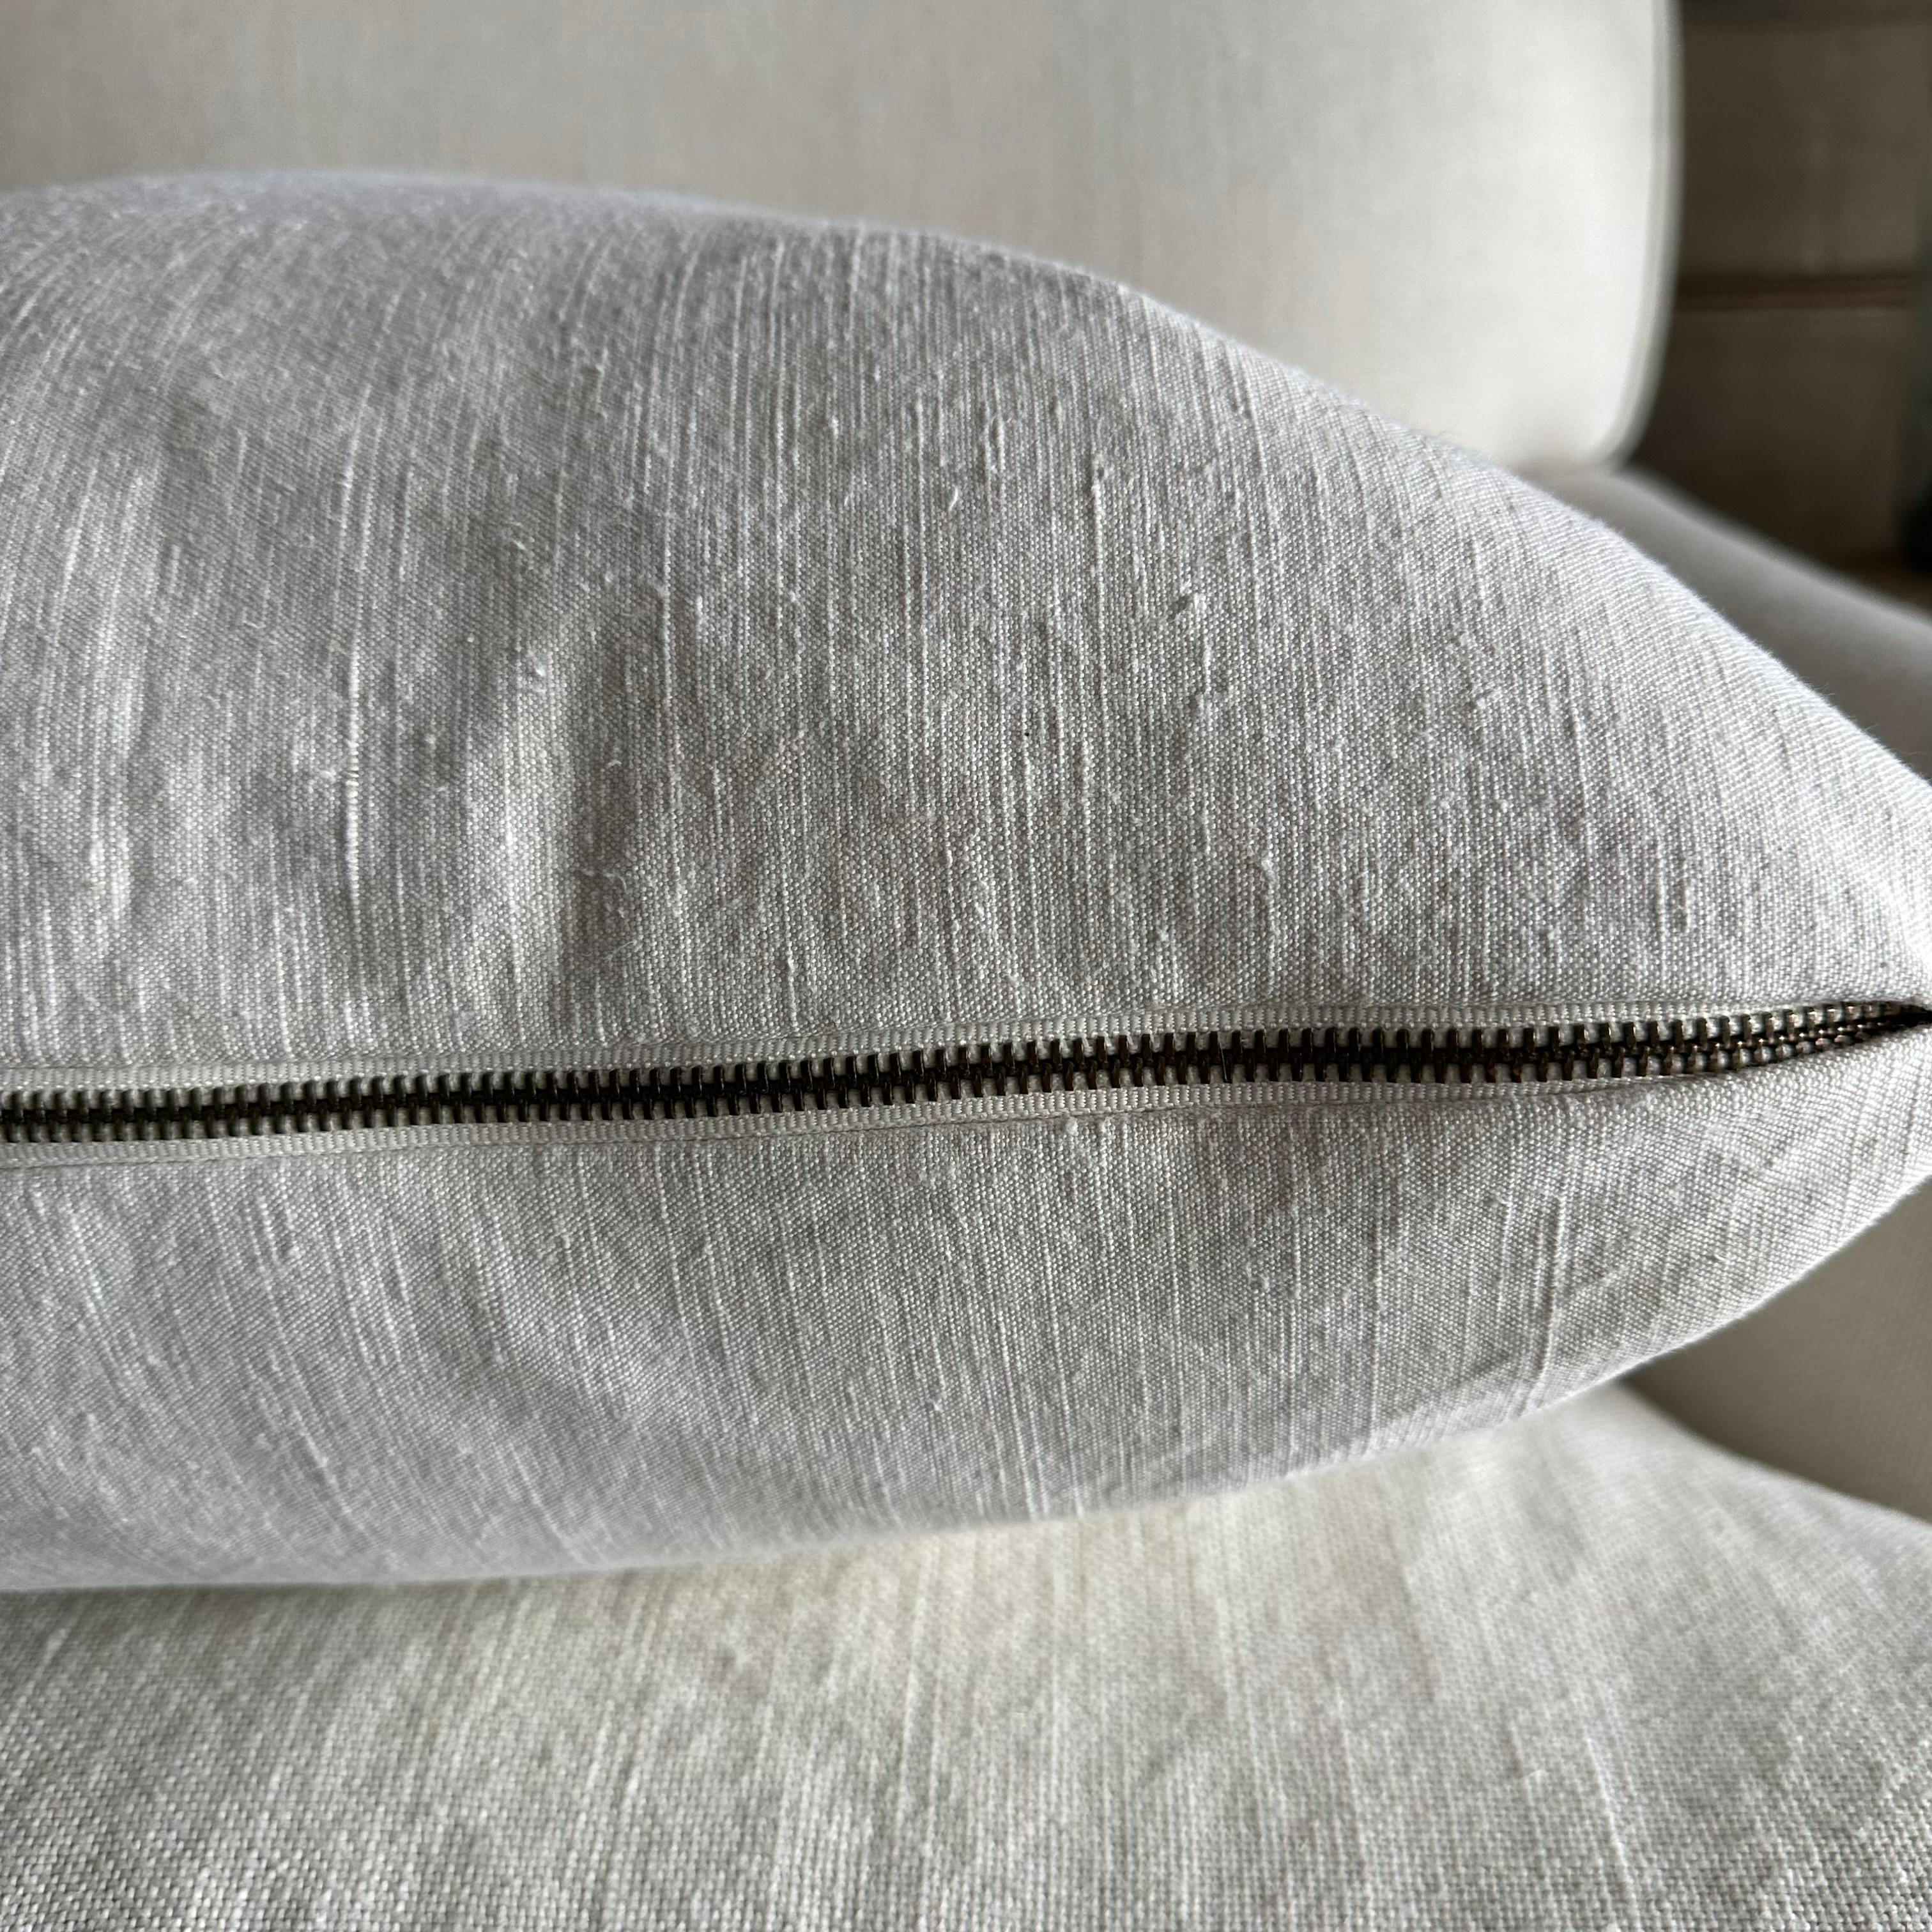 Cotton Antique French White Grain Linen Pillows with Insert For Sale